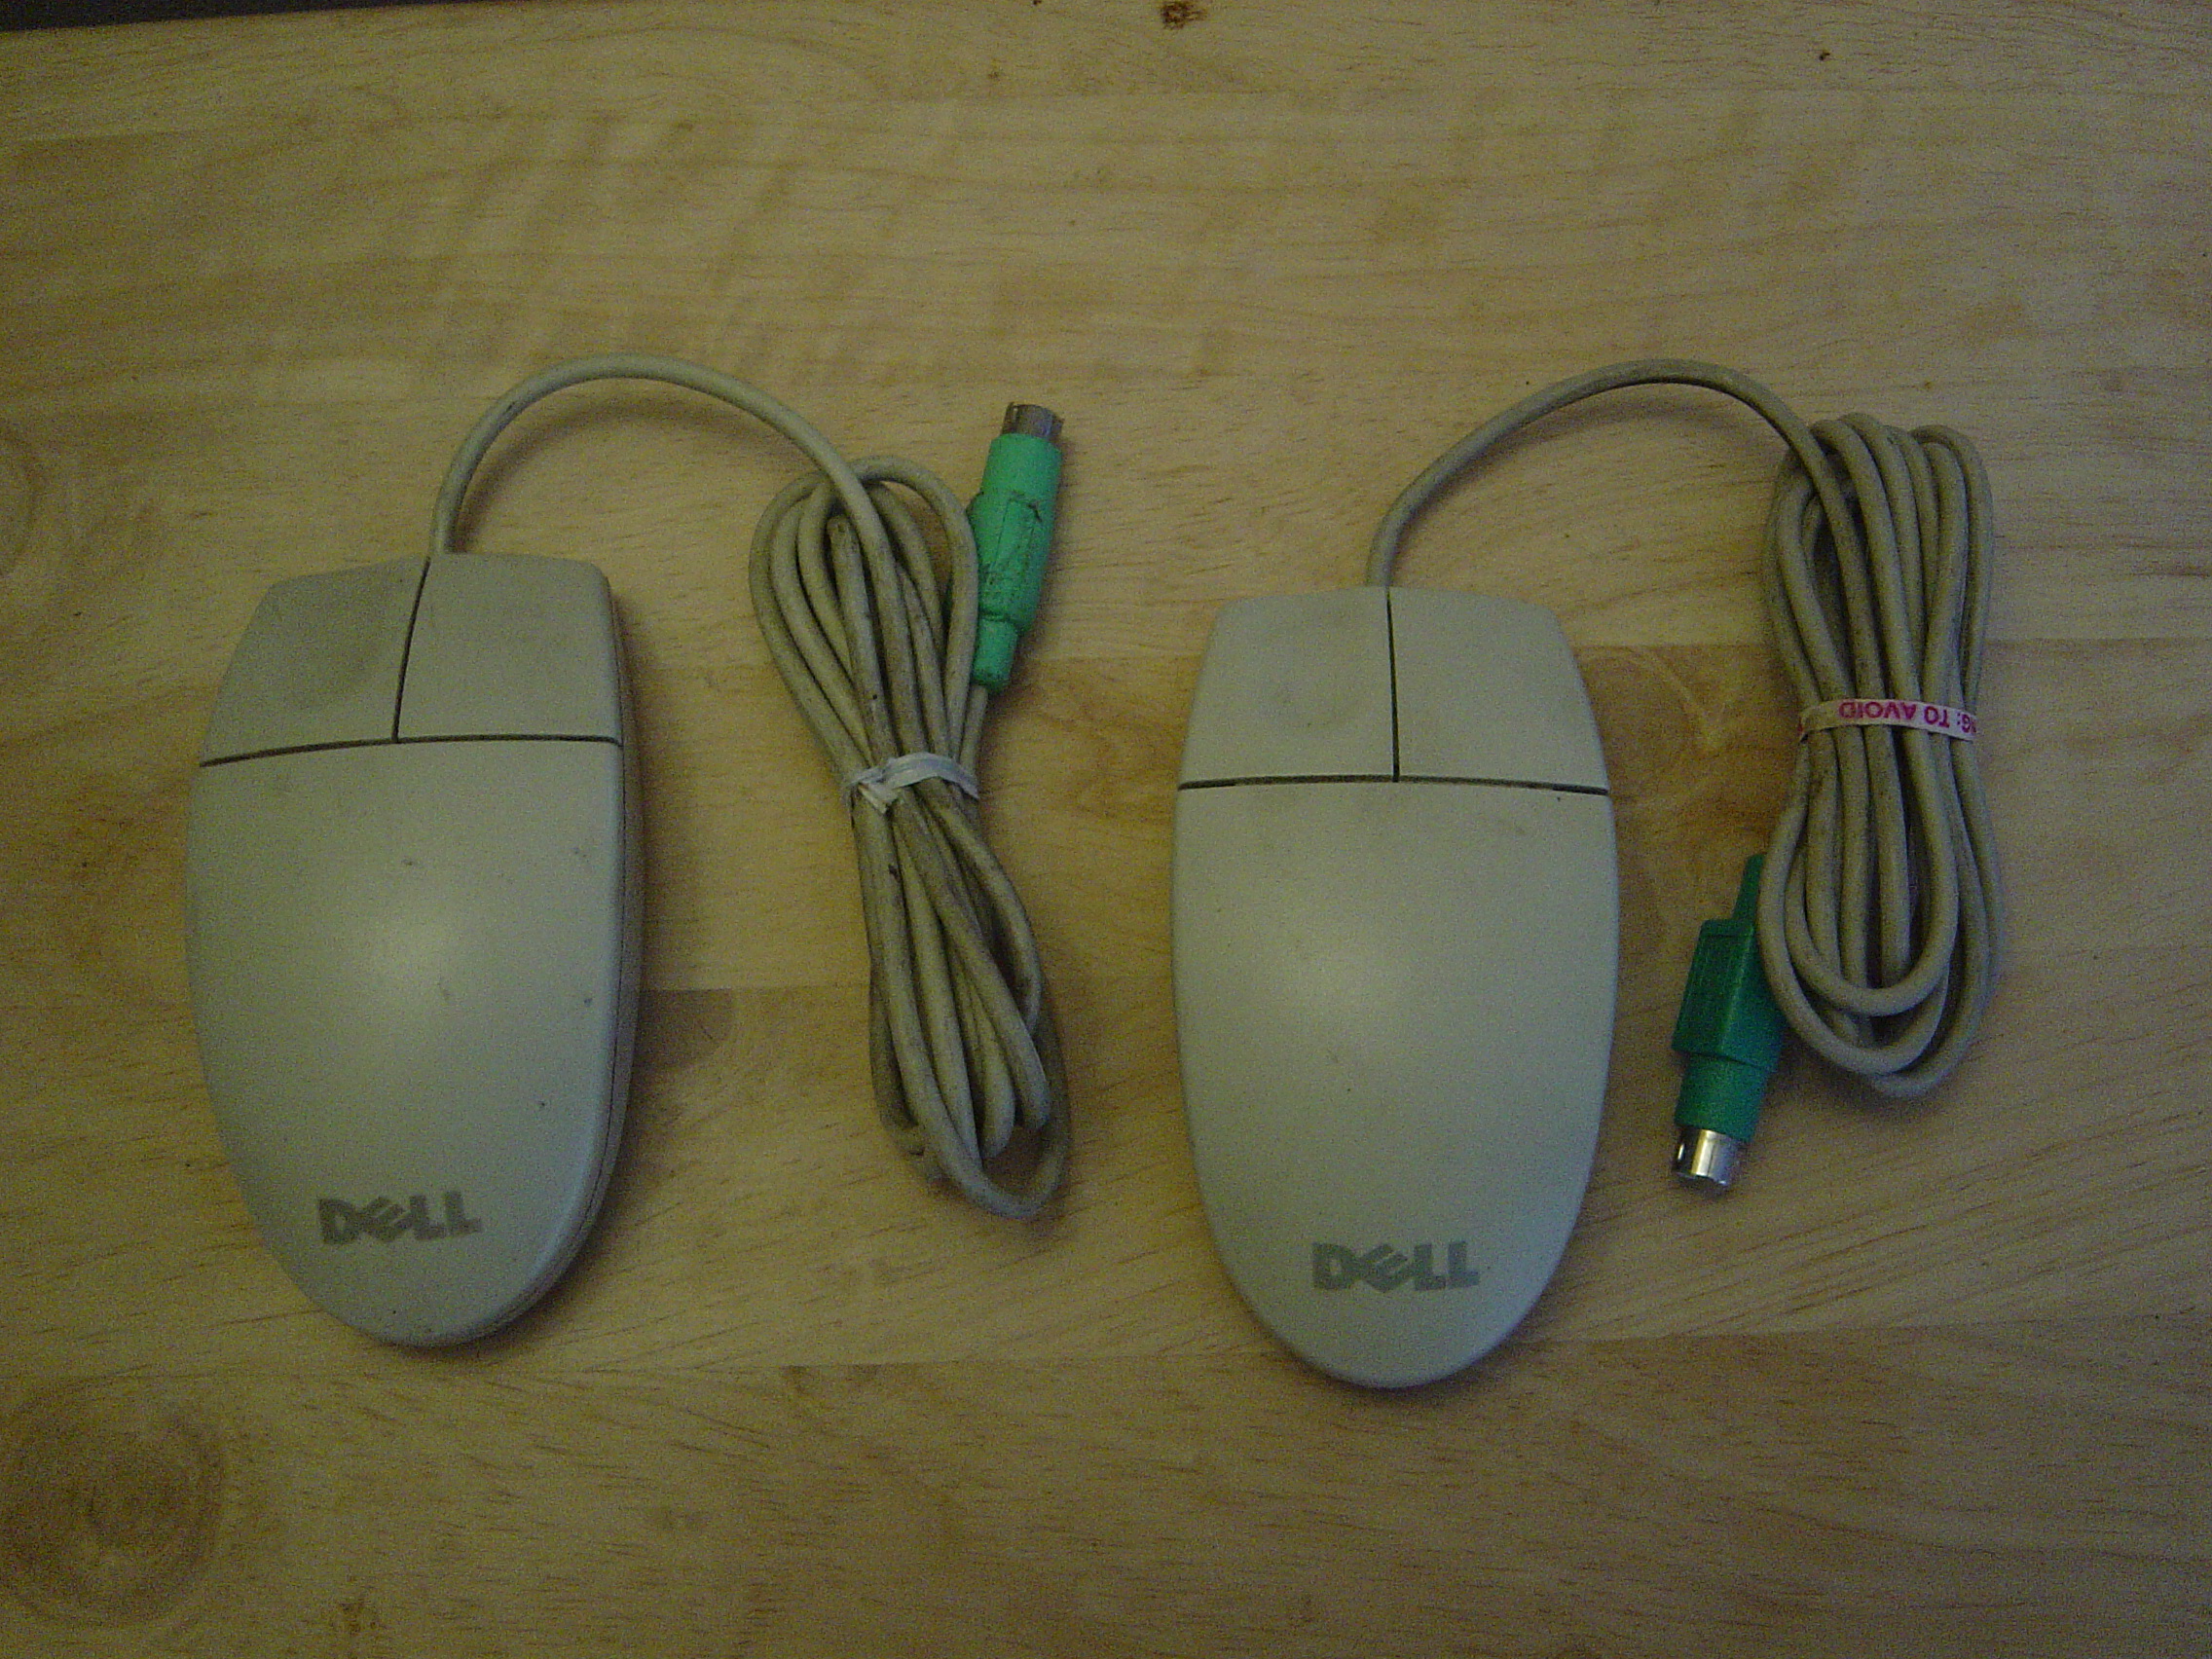 Dell wired mouse (set of 2)